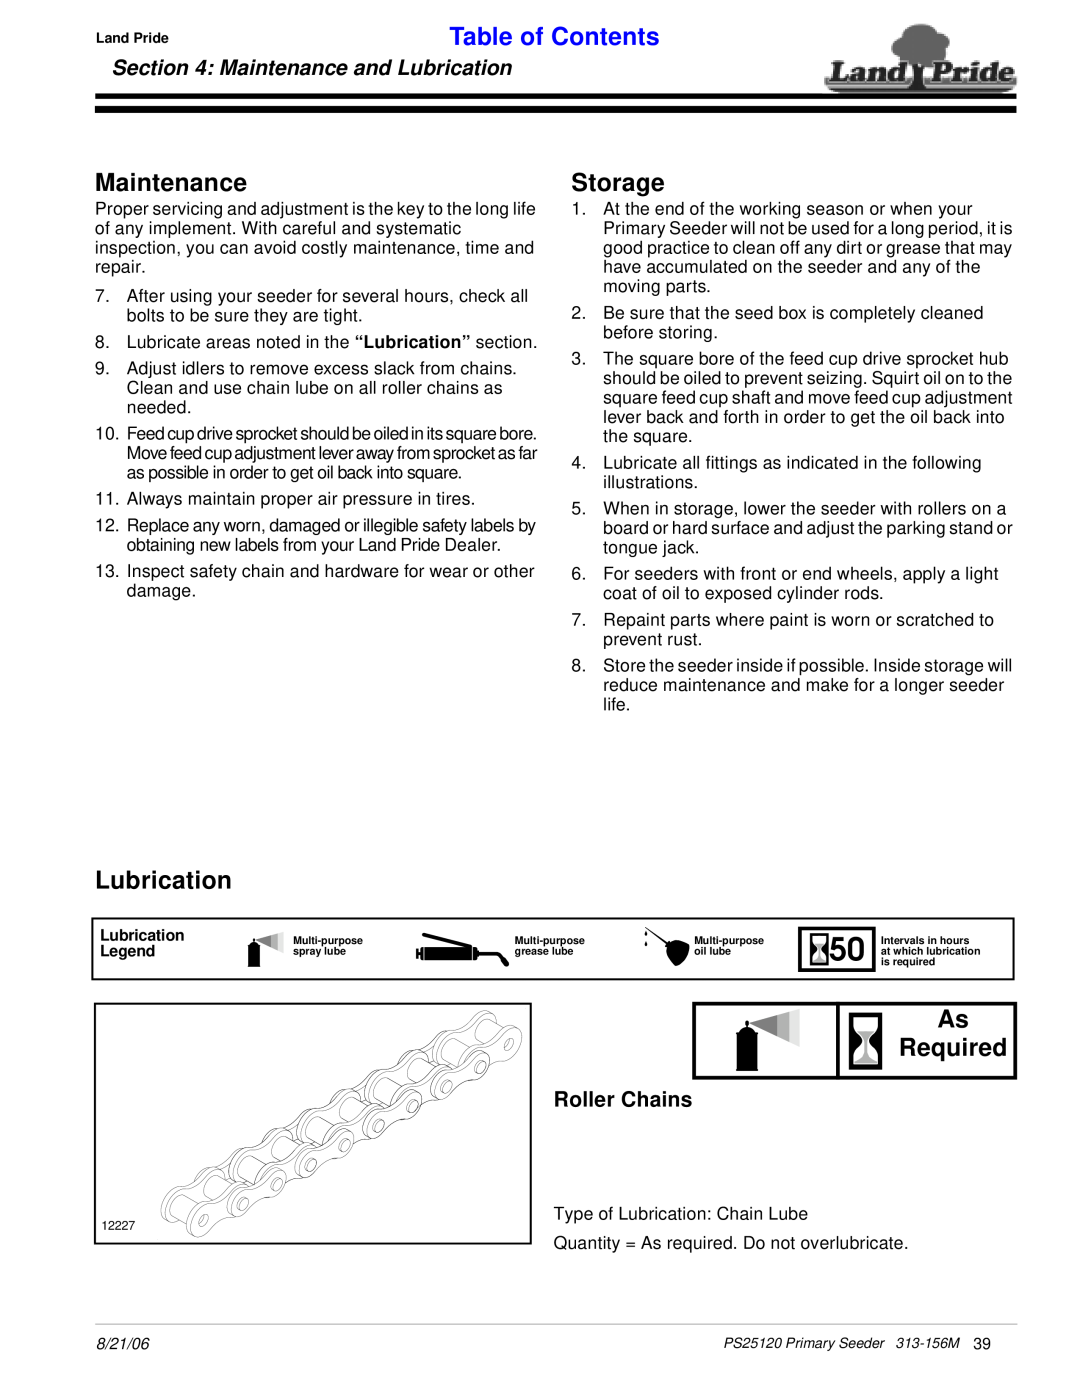 Land Pride PS25120 manual Storage, As Required, Maintenance and Lubrication, Roller Chains, Table of Contents 